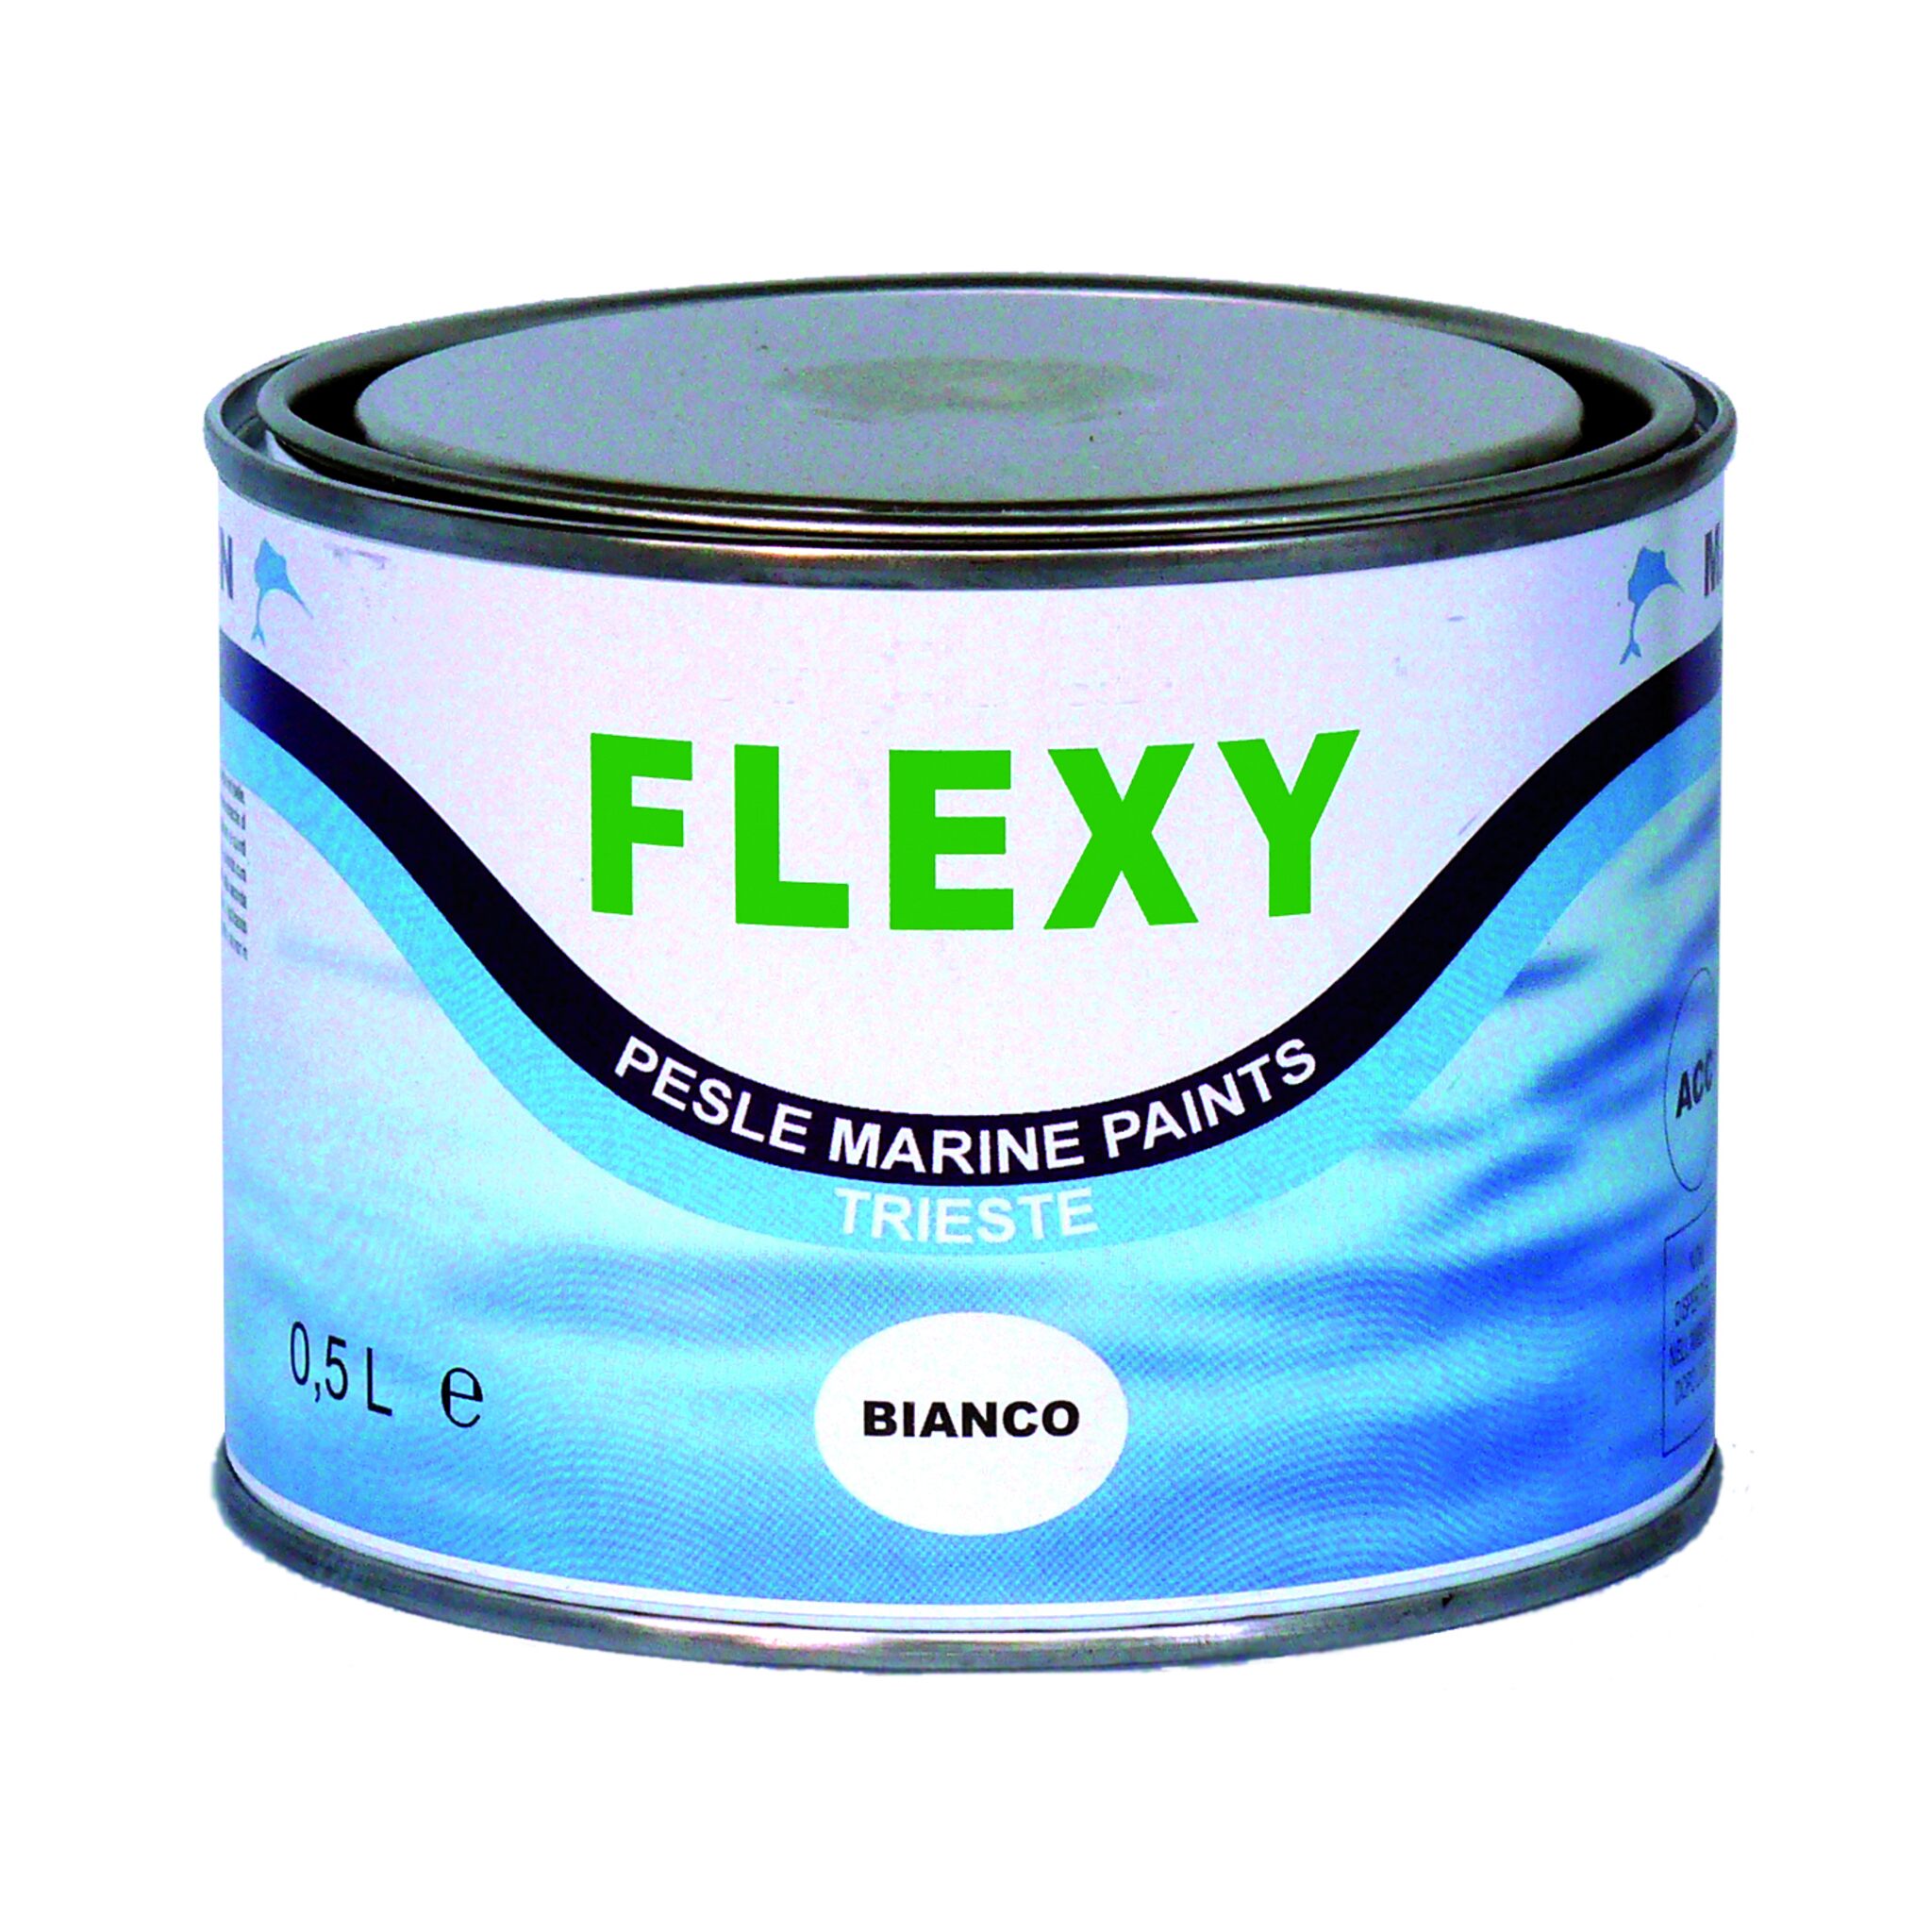 MARLIN Flexy Elastic Rubber Paint for Inflatable Boats